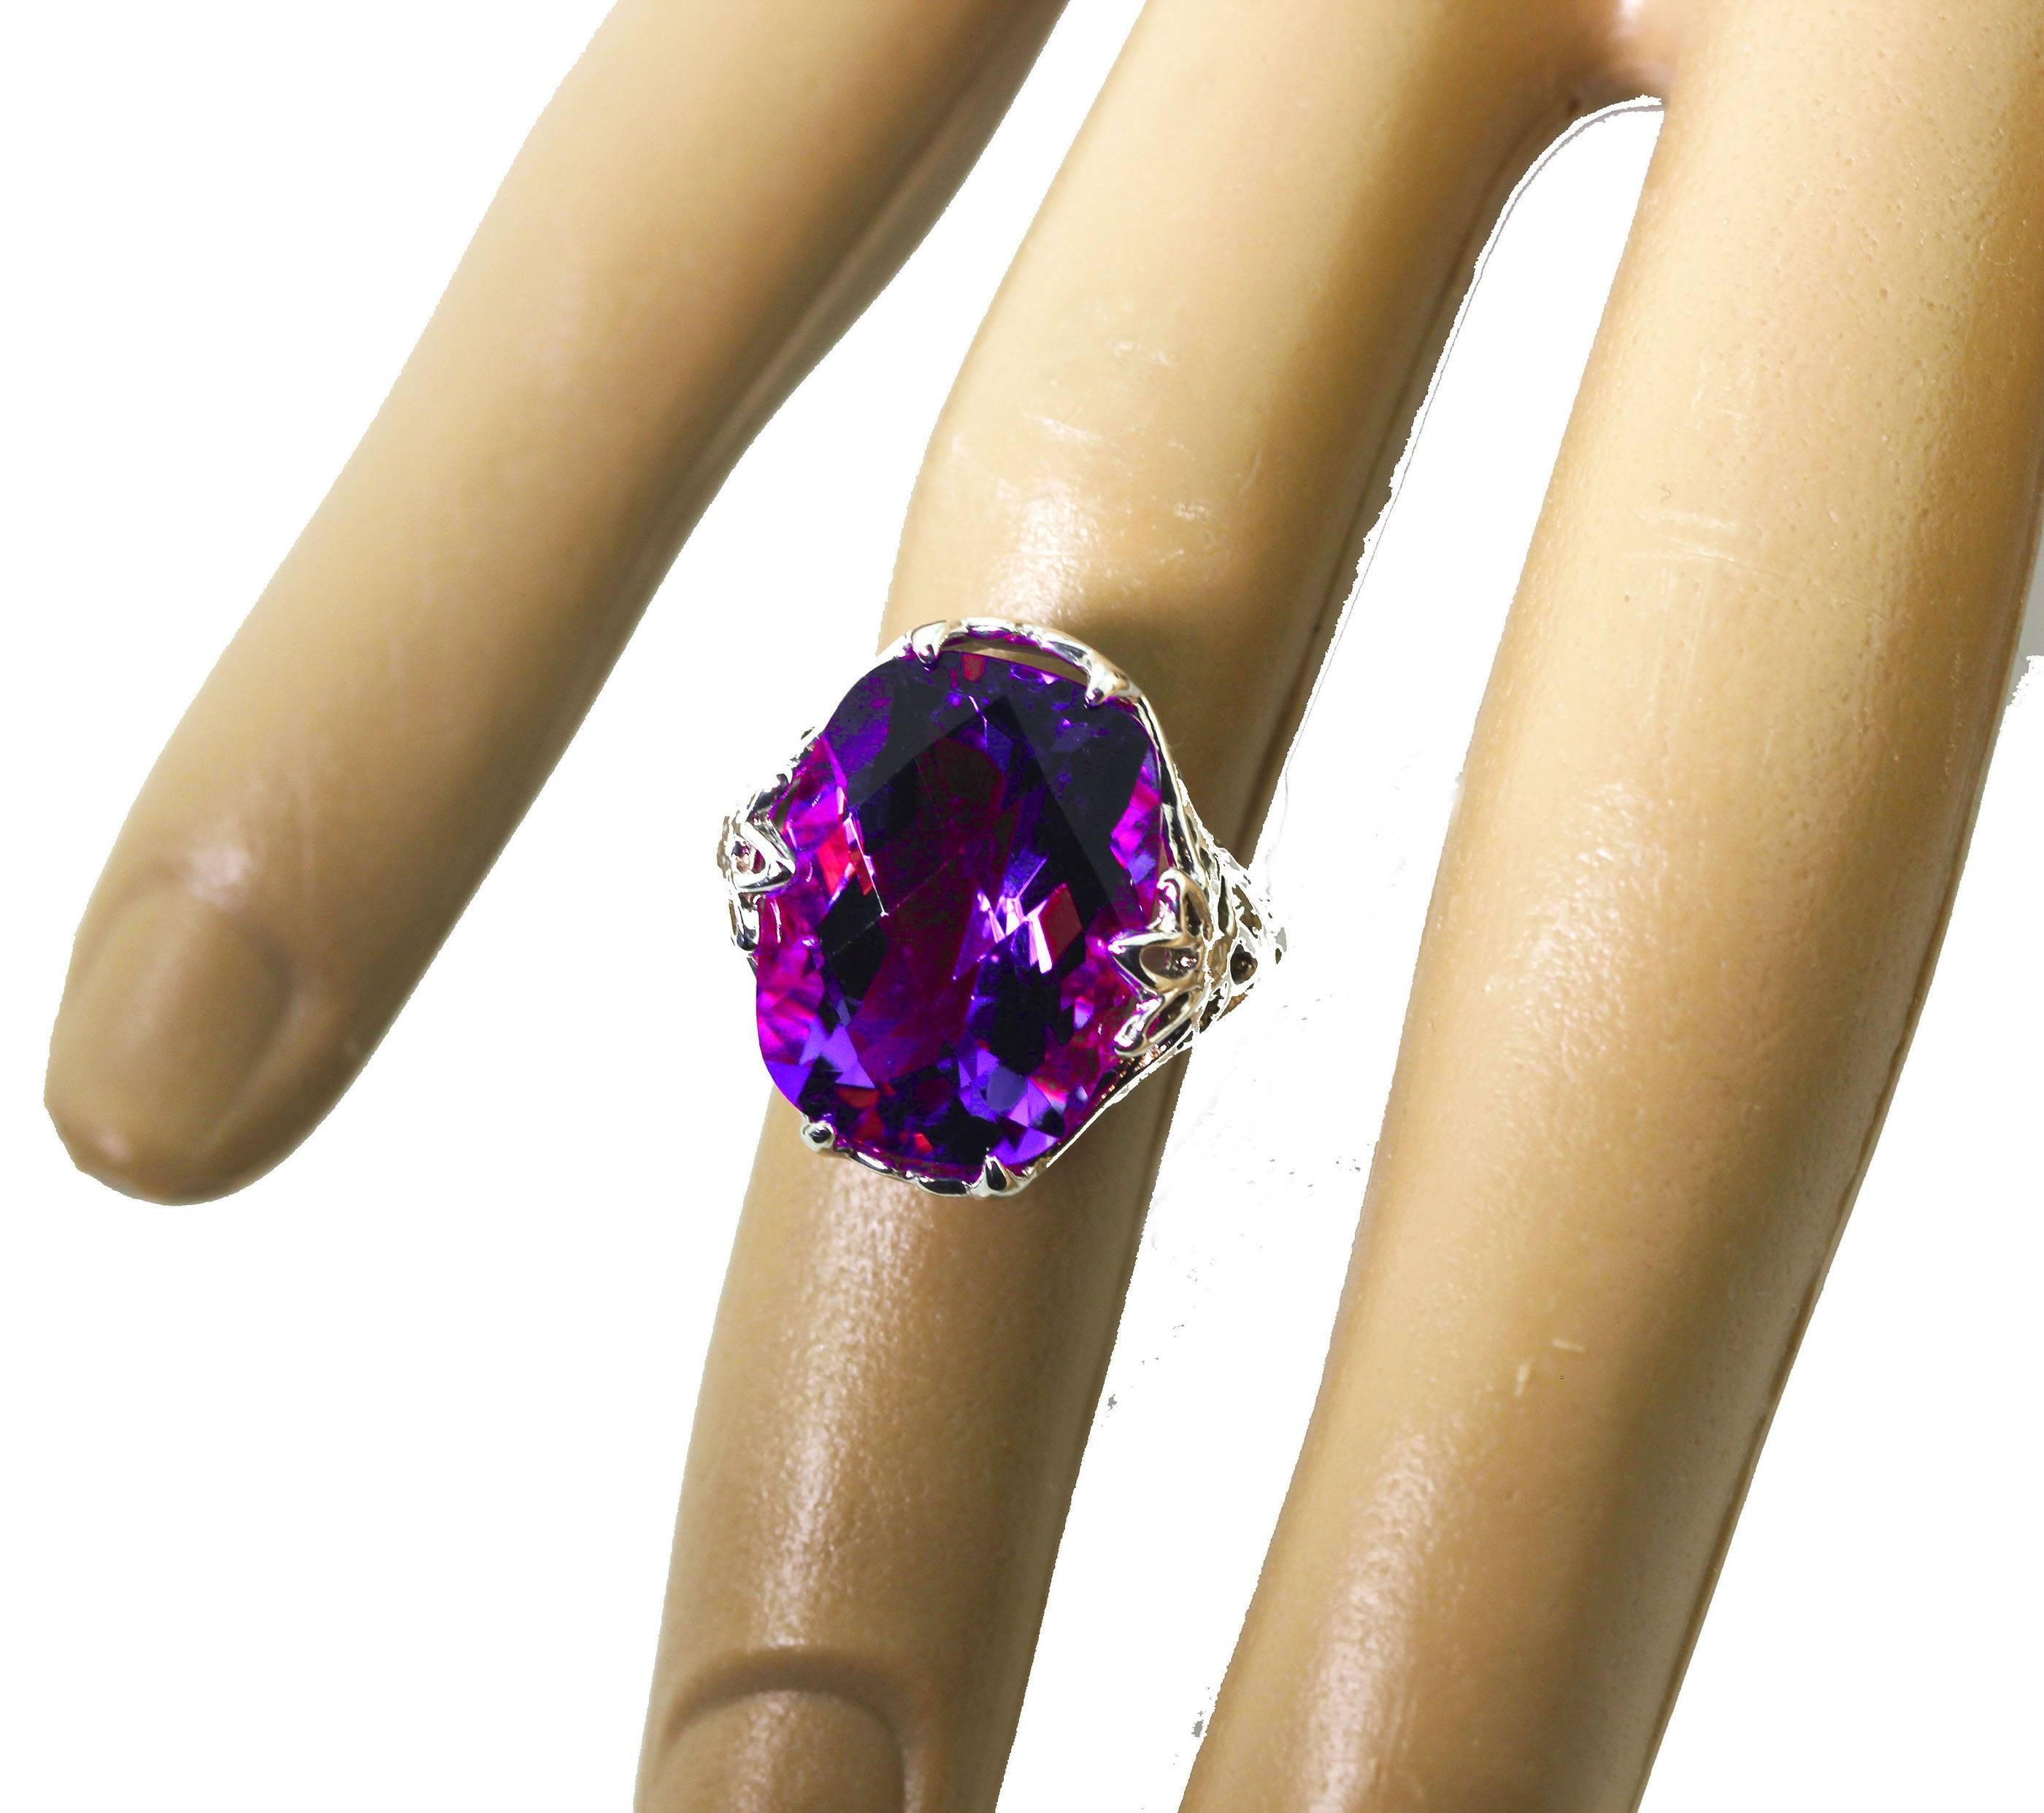 Glittering checkerboard gemcut natural 9.5 carat Amethyst (16.5 mm x 12.5 mm) with natural pinky flashes inside the stone.  It is set in a sterling silver ring size 5 (sizable FOR FREE).   